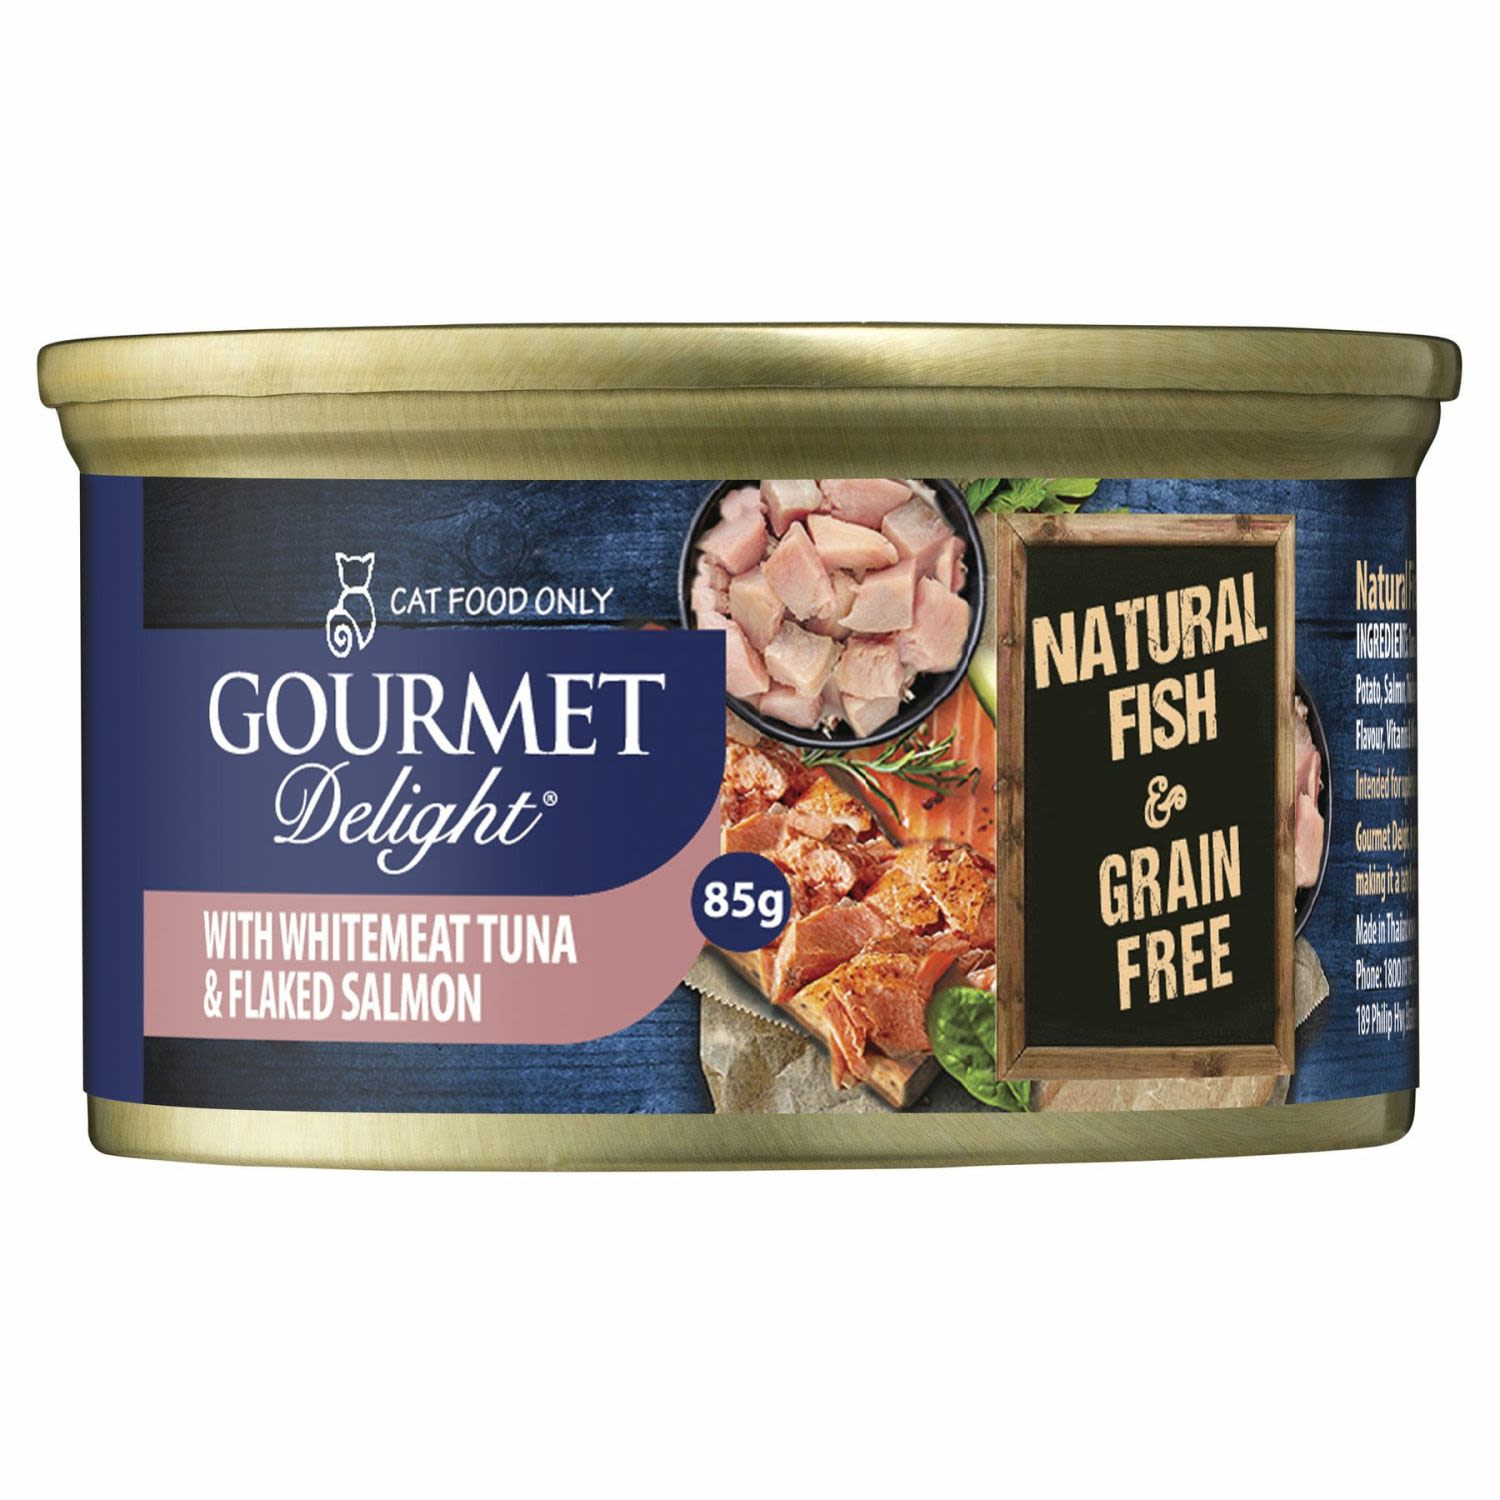 Gourmet Delight with Whitemeat Tuna & Flaked Salmon, 85 Gram